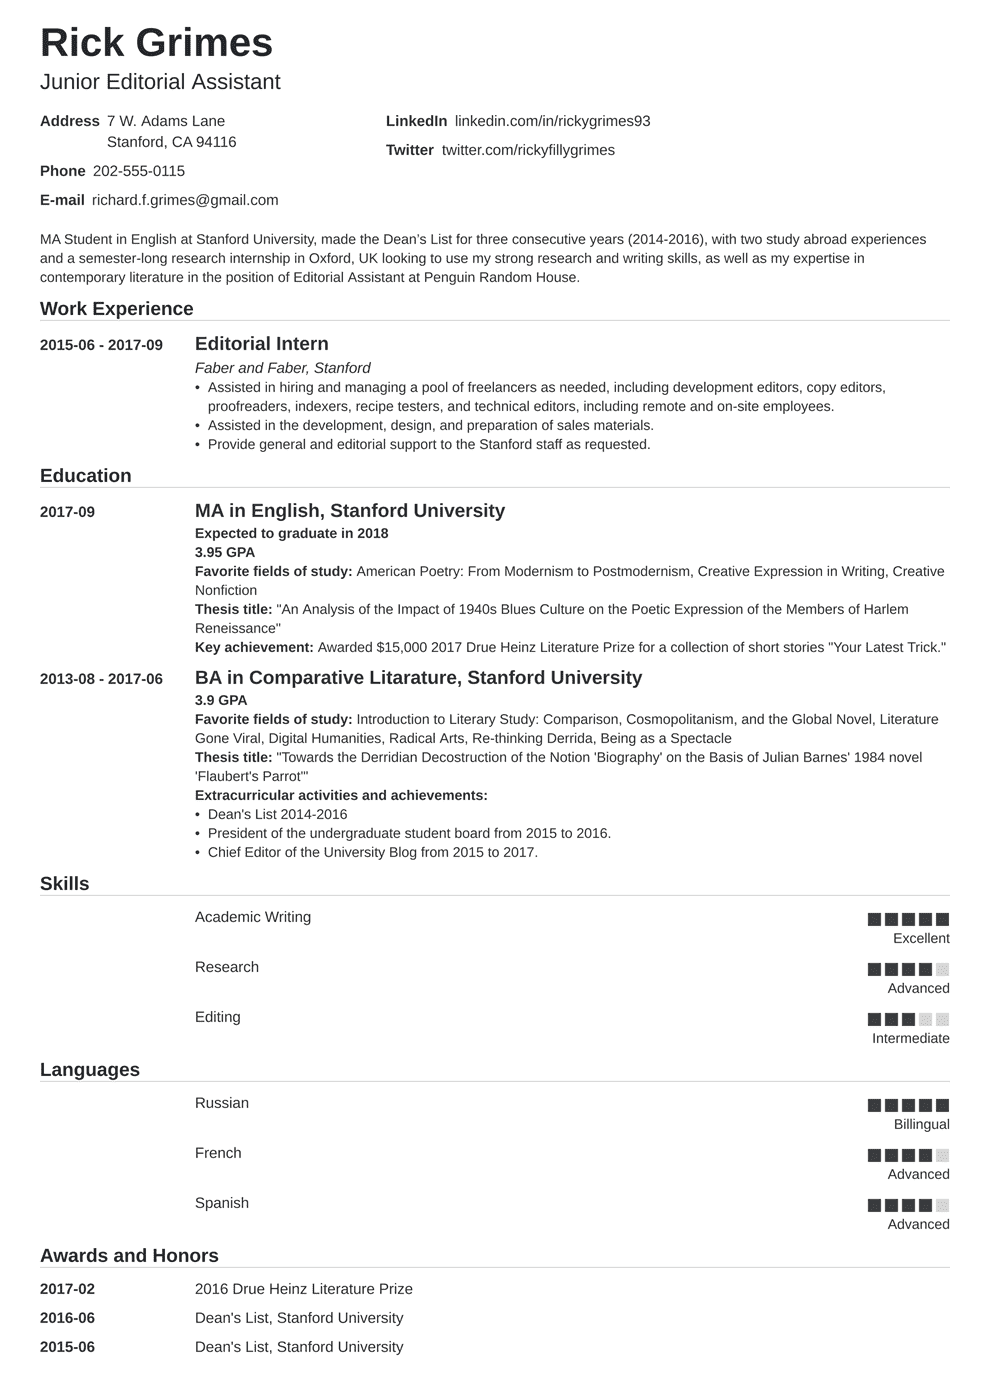 Resume Template Entry Level from cdn-images.zety.com